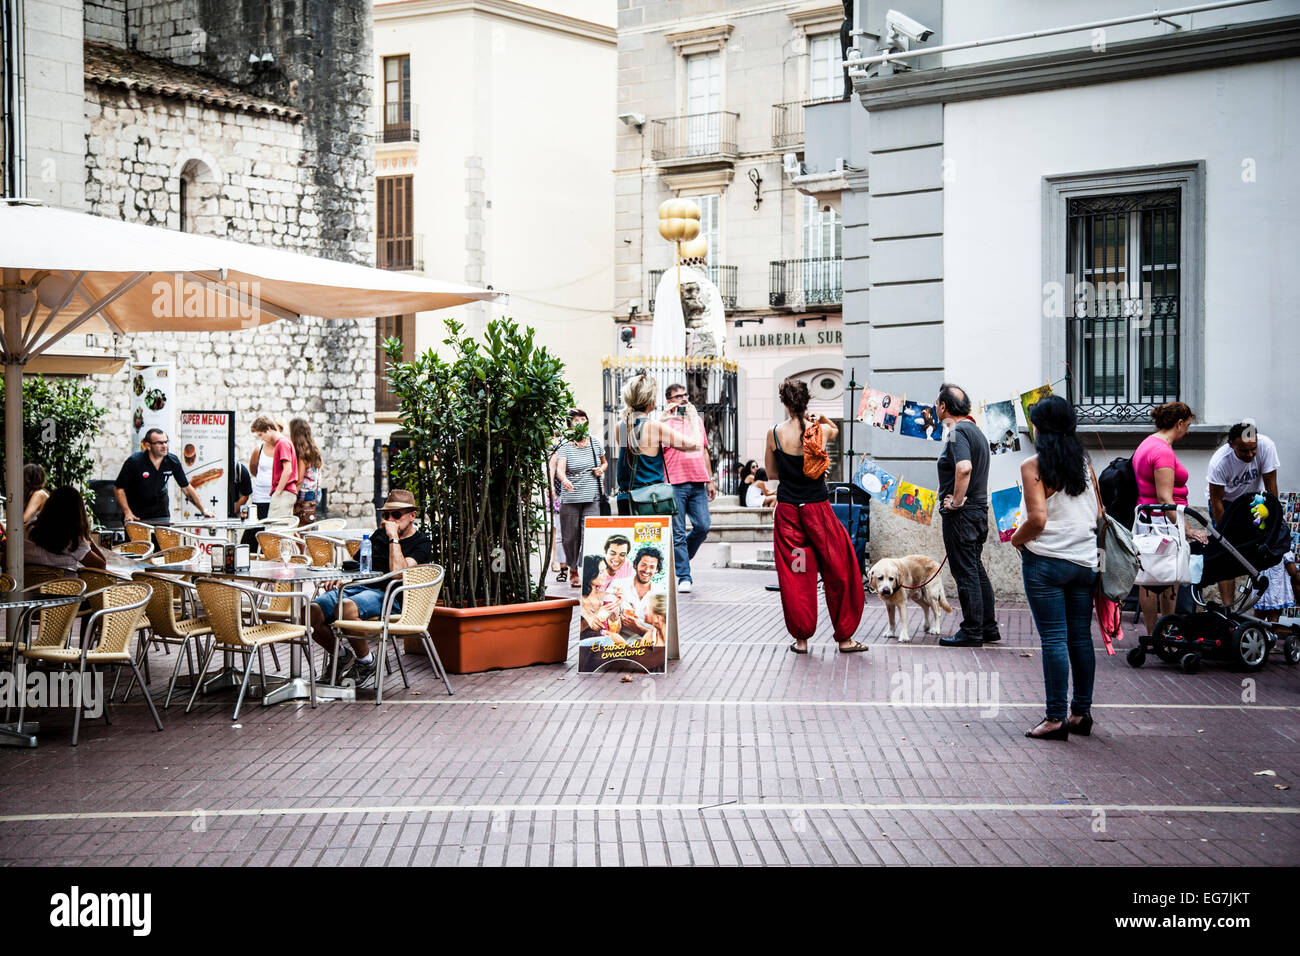 Shopping street in Figueres, Spain Stock Photo